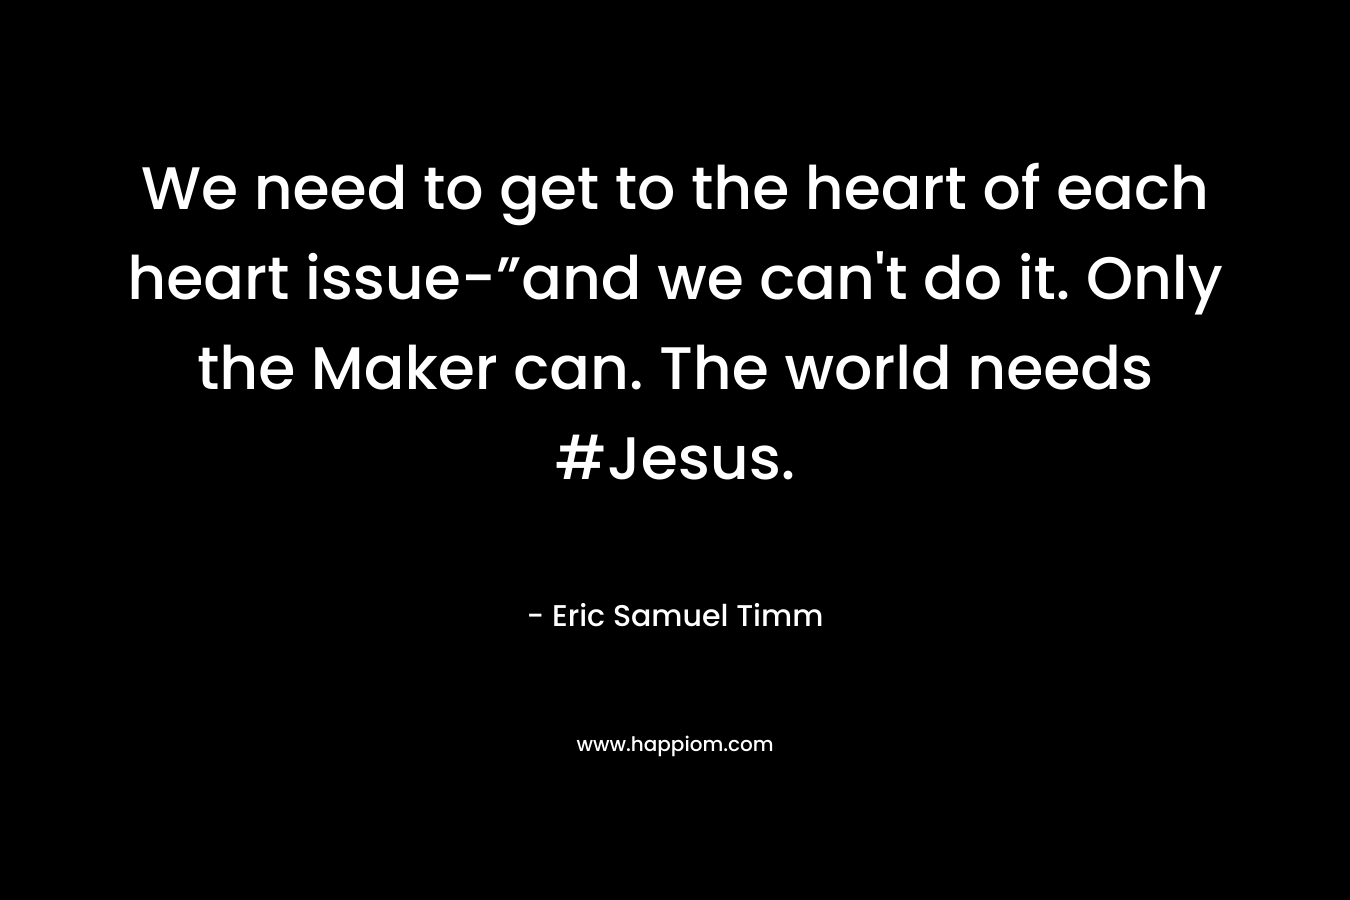 We need to get to the heart of each heart issue-”and we can’t do it. Only the Maker can. The world needs #Jesus. – Eric Samuel Timm